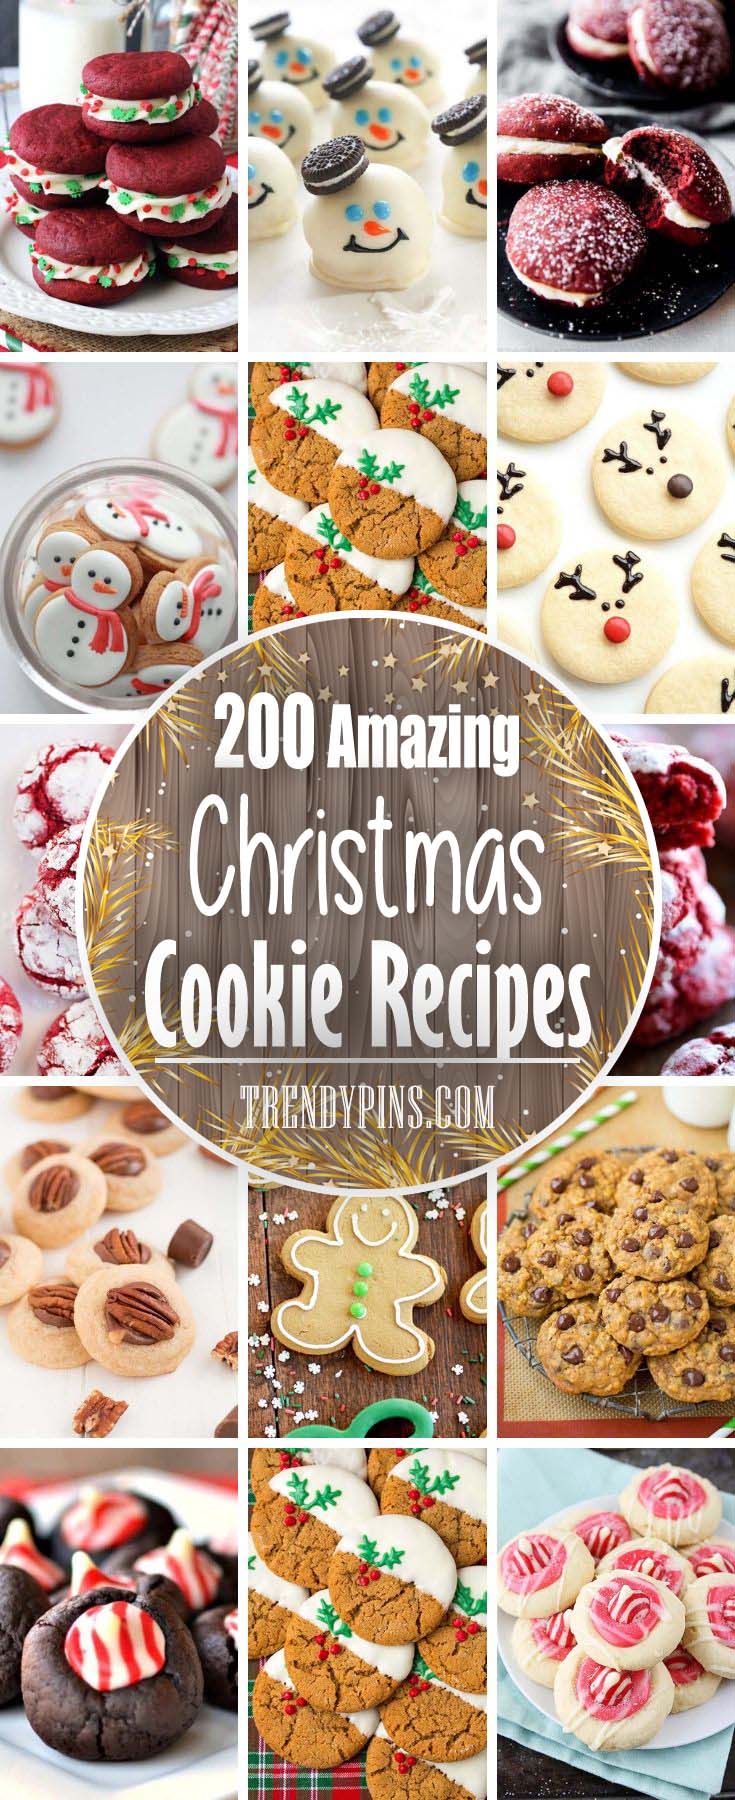 200 Amazing Christmas Cookie Recipes #Christmas #cookie #recipes #trendypins